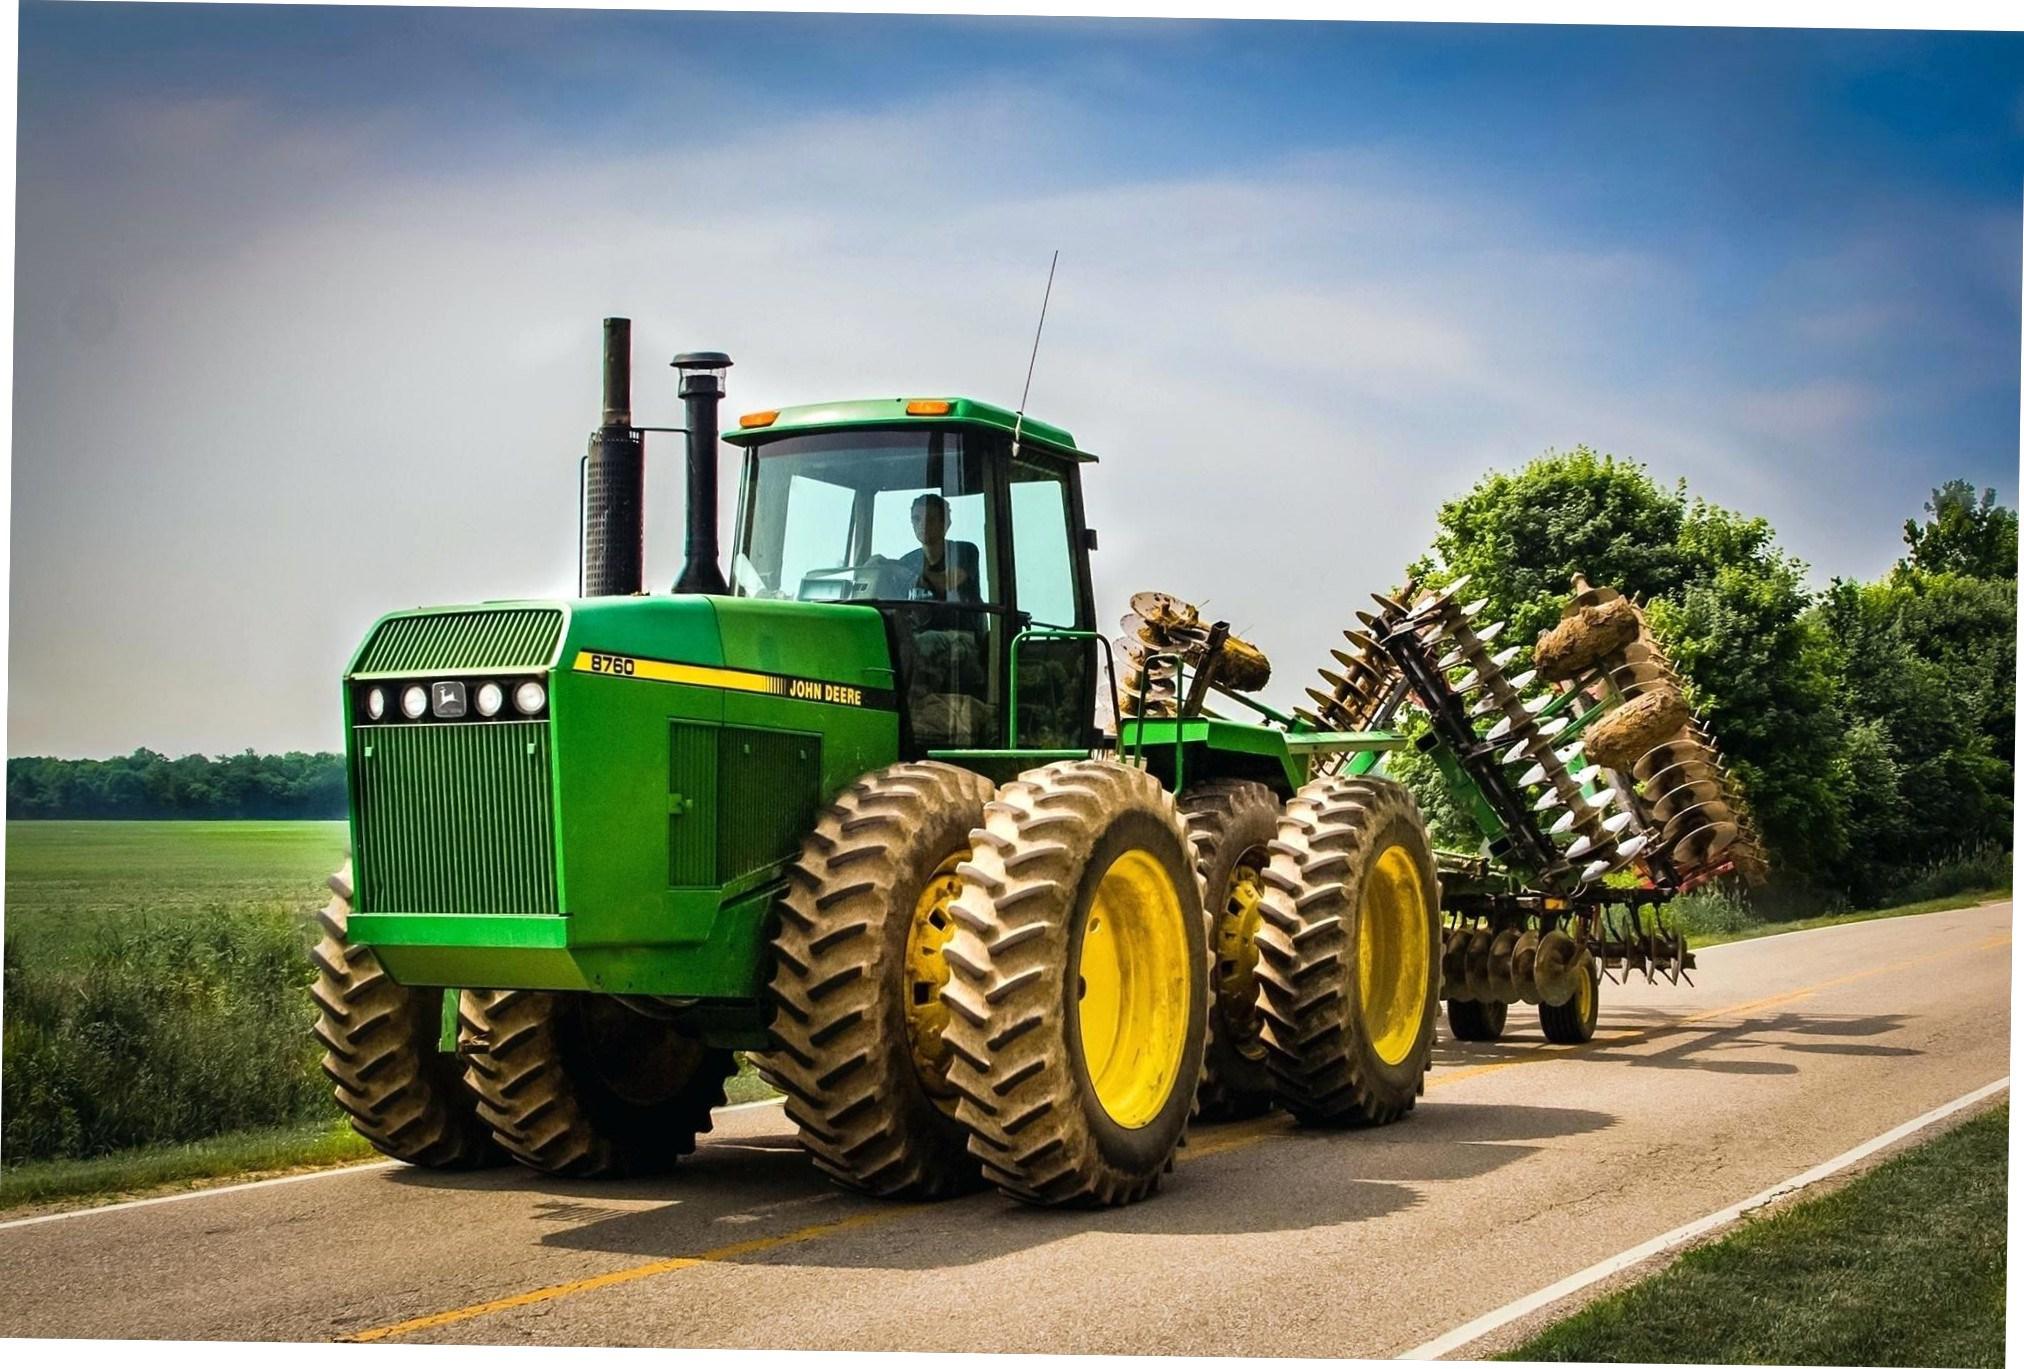 john deere wallpaper border,land vehicle,tractor,vehicle,agricultural machinery,mode of transport